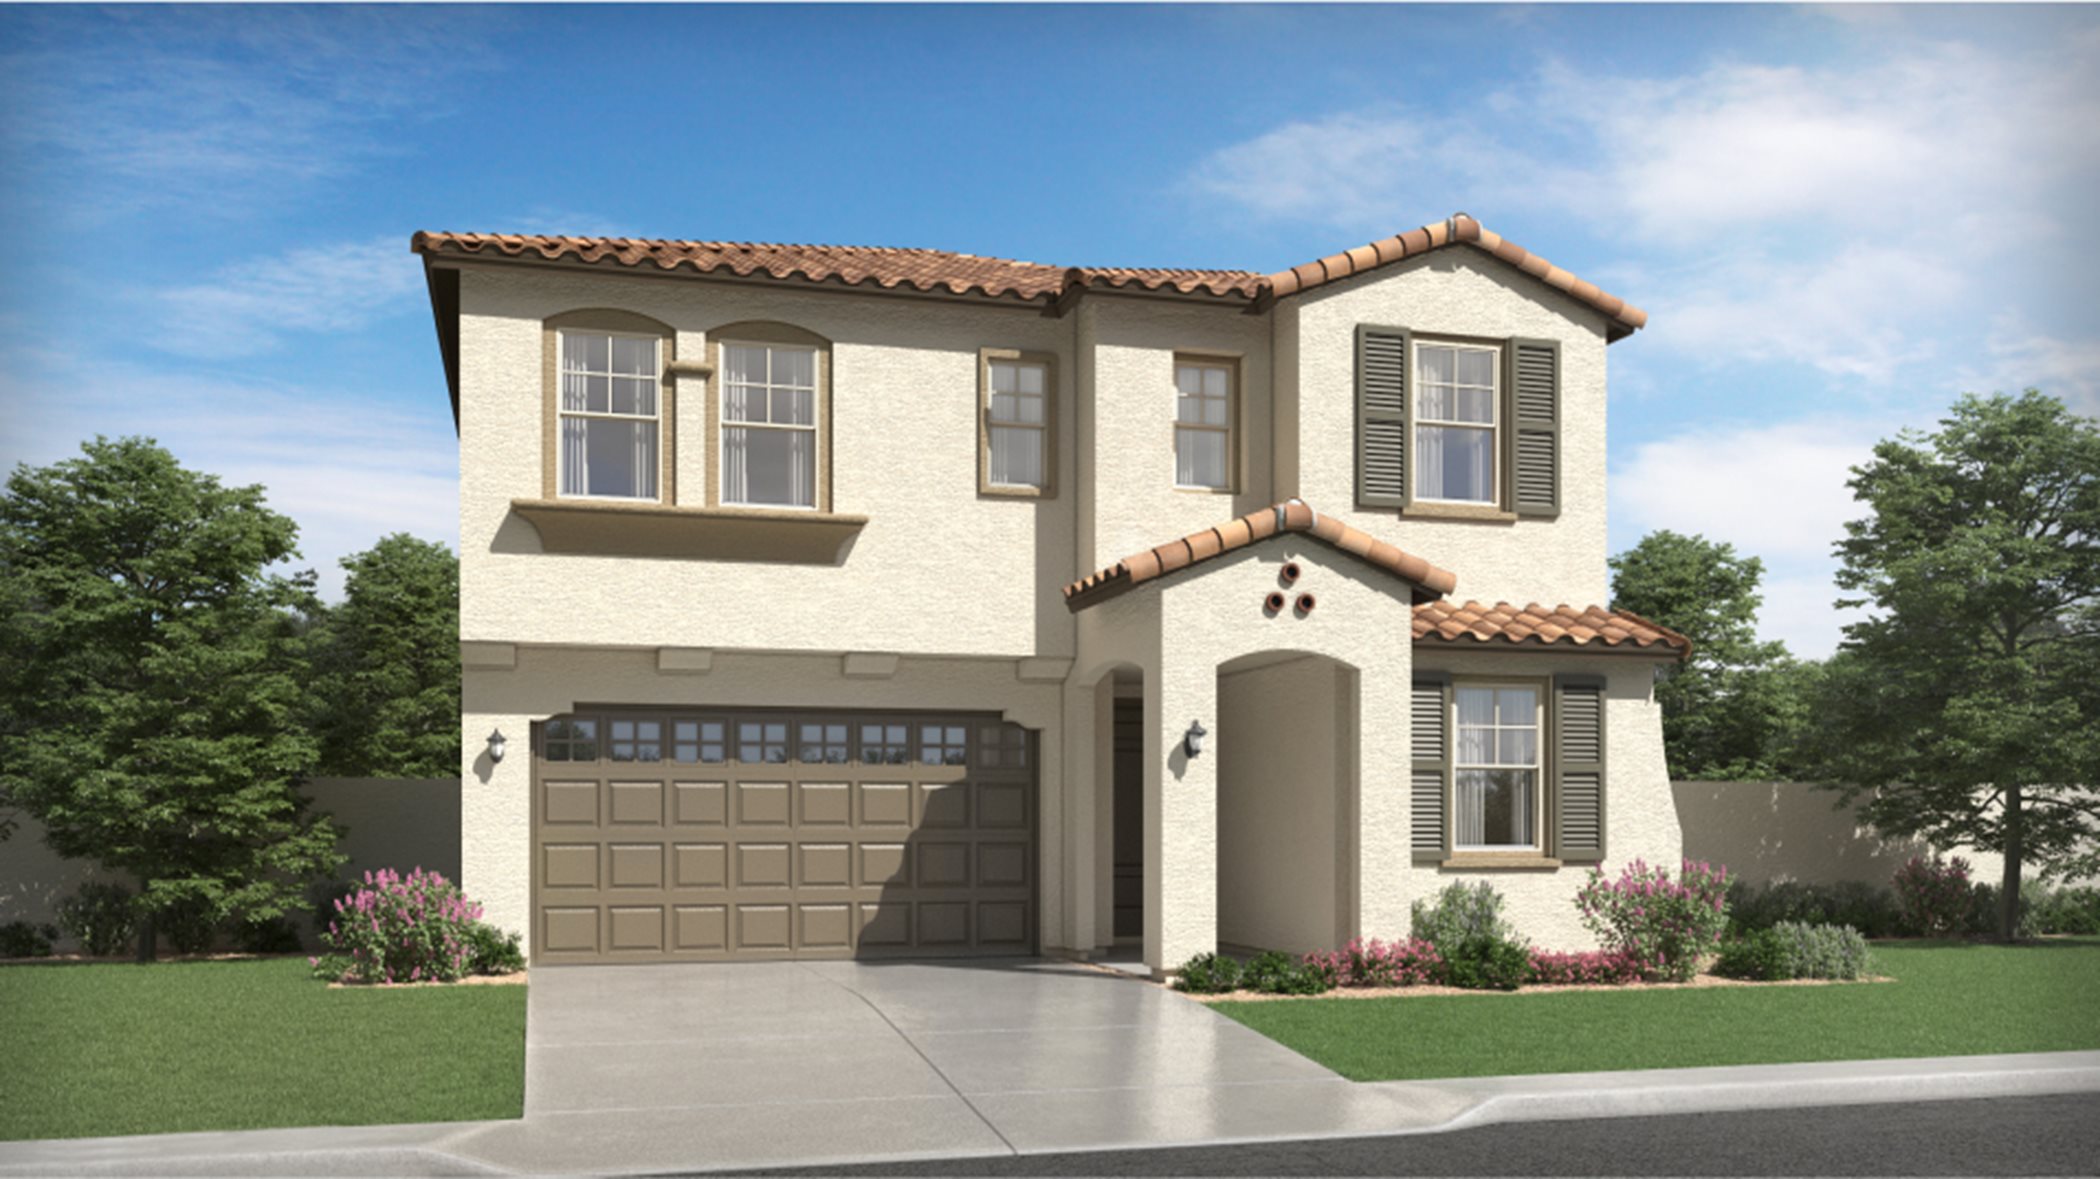 Spanish Colonial Exterior for Plan 3526